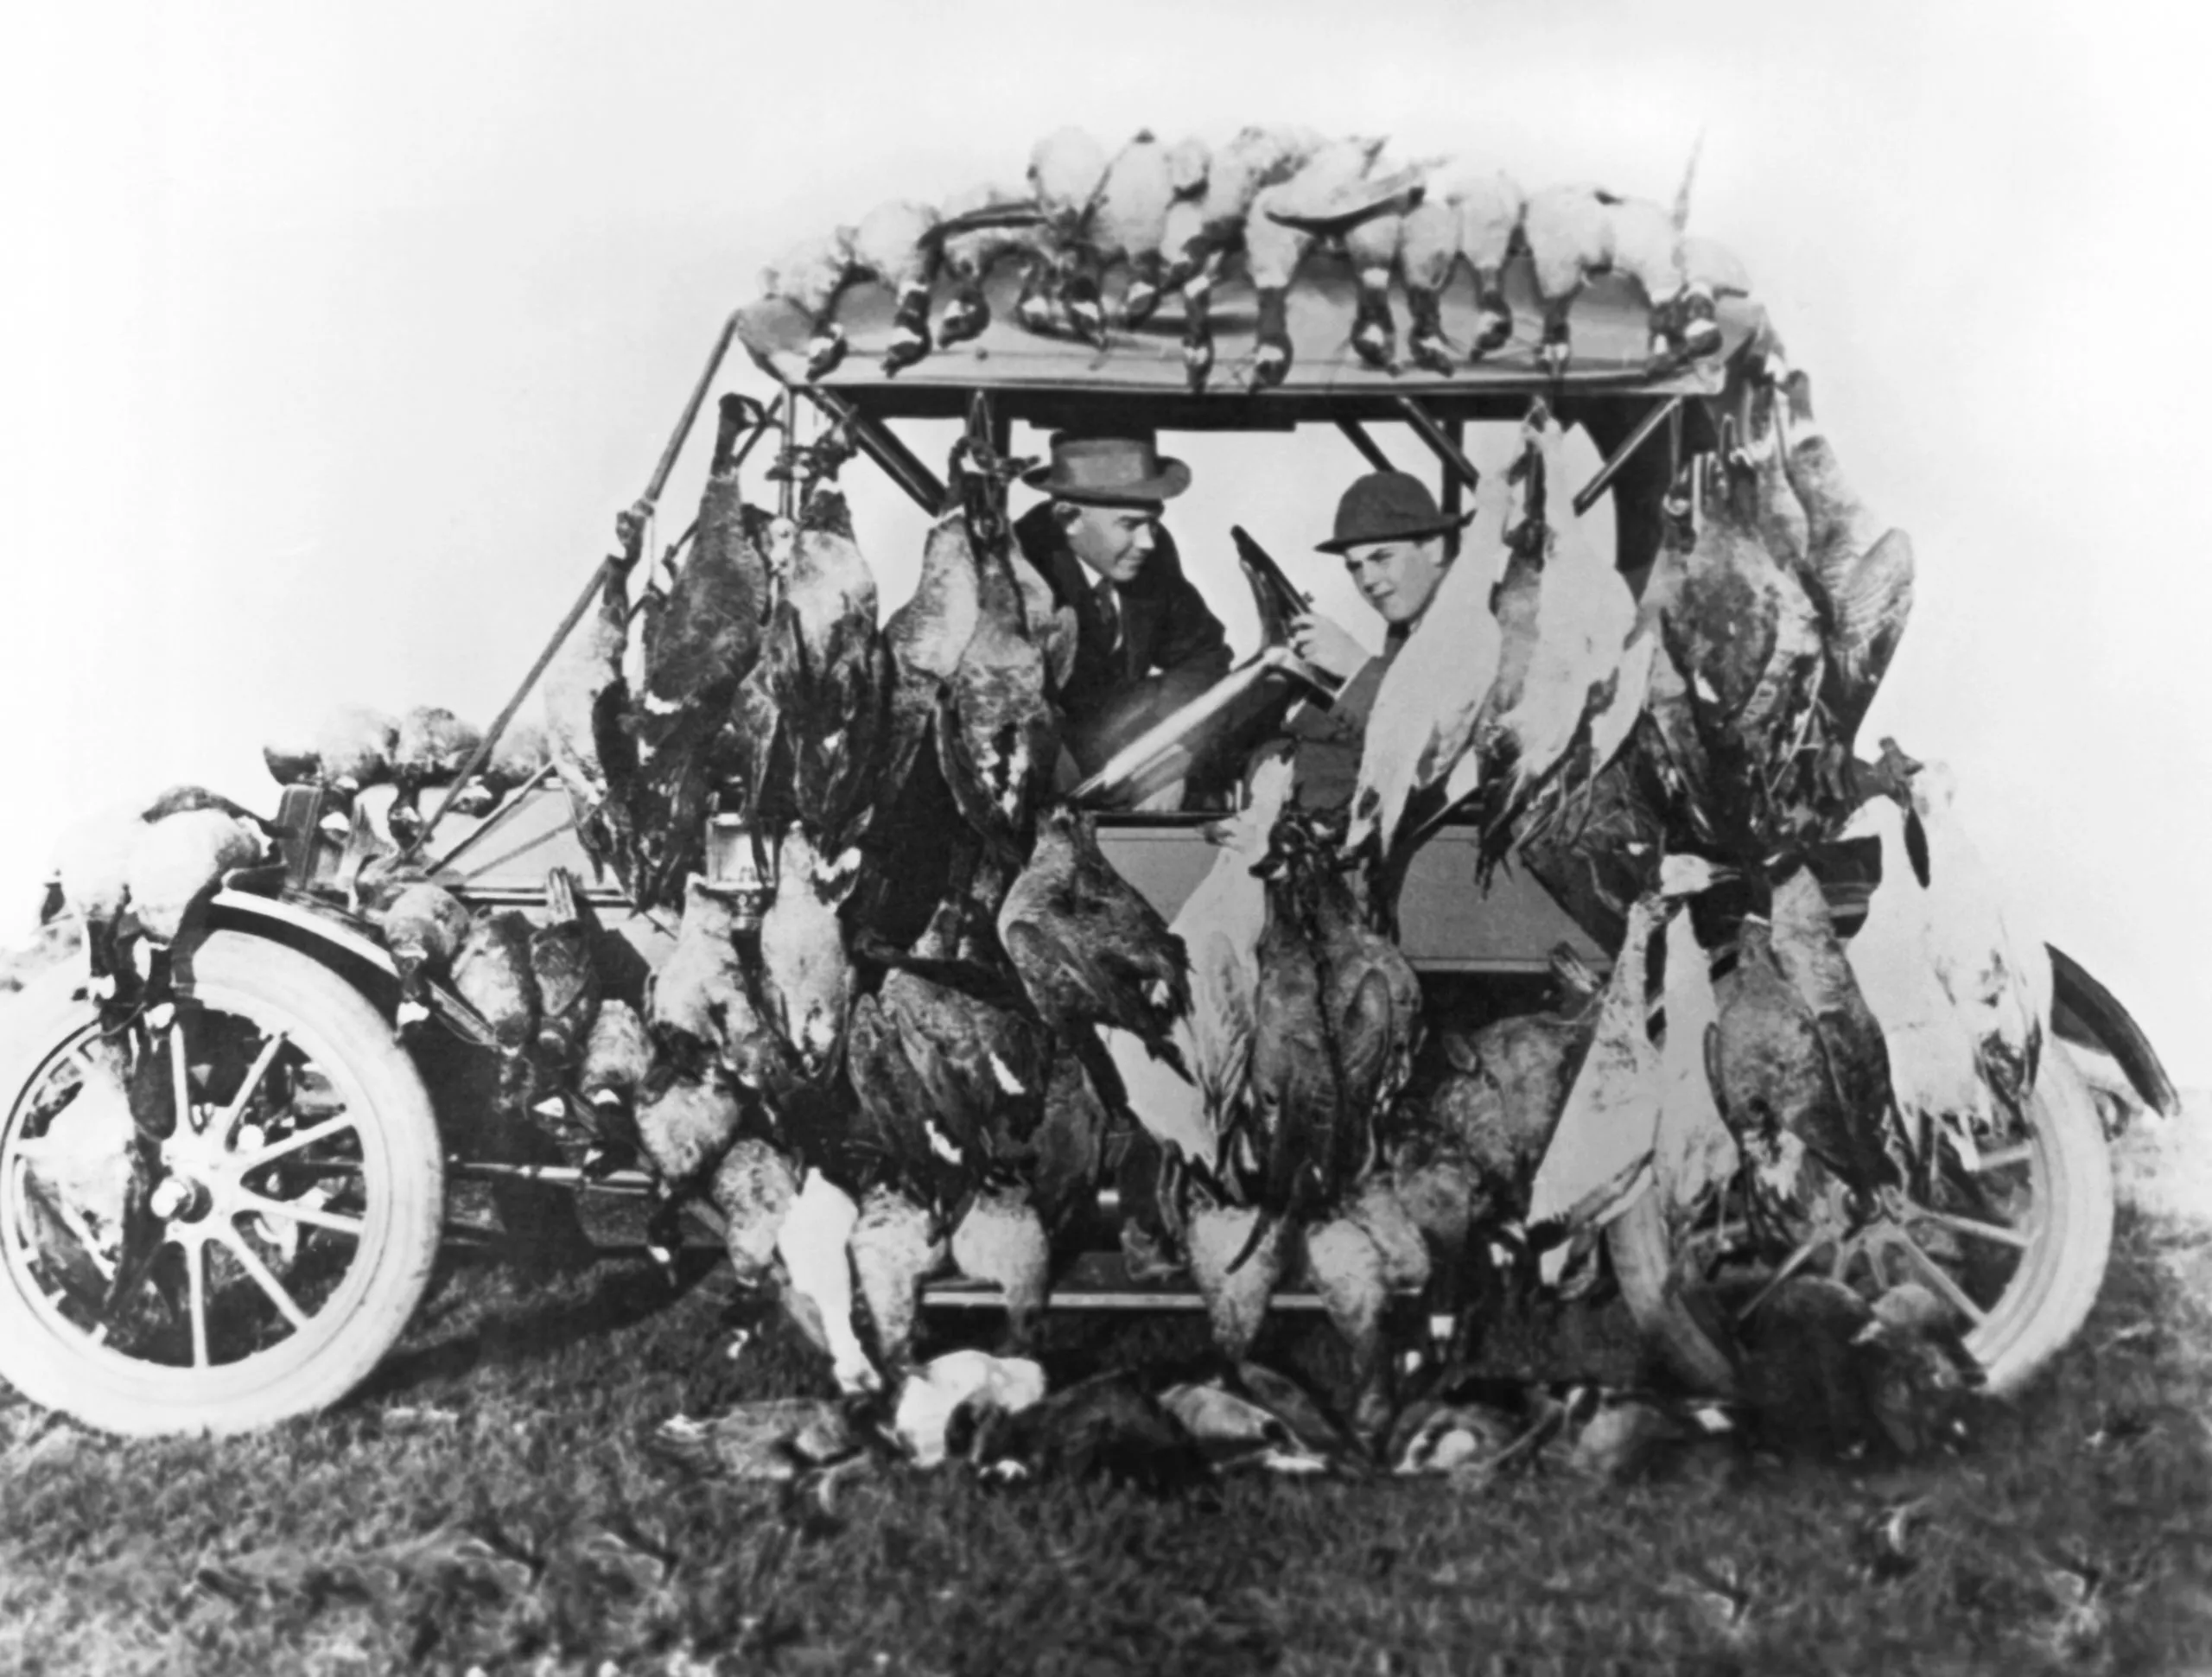 Hunters with a car laden with geese and ducks, mid 1910s. (Photo by Malcolm Lubliner/Underwood Archives/Getty Images)